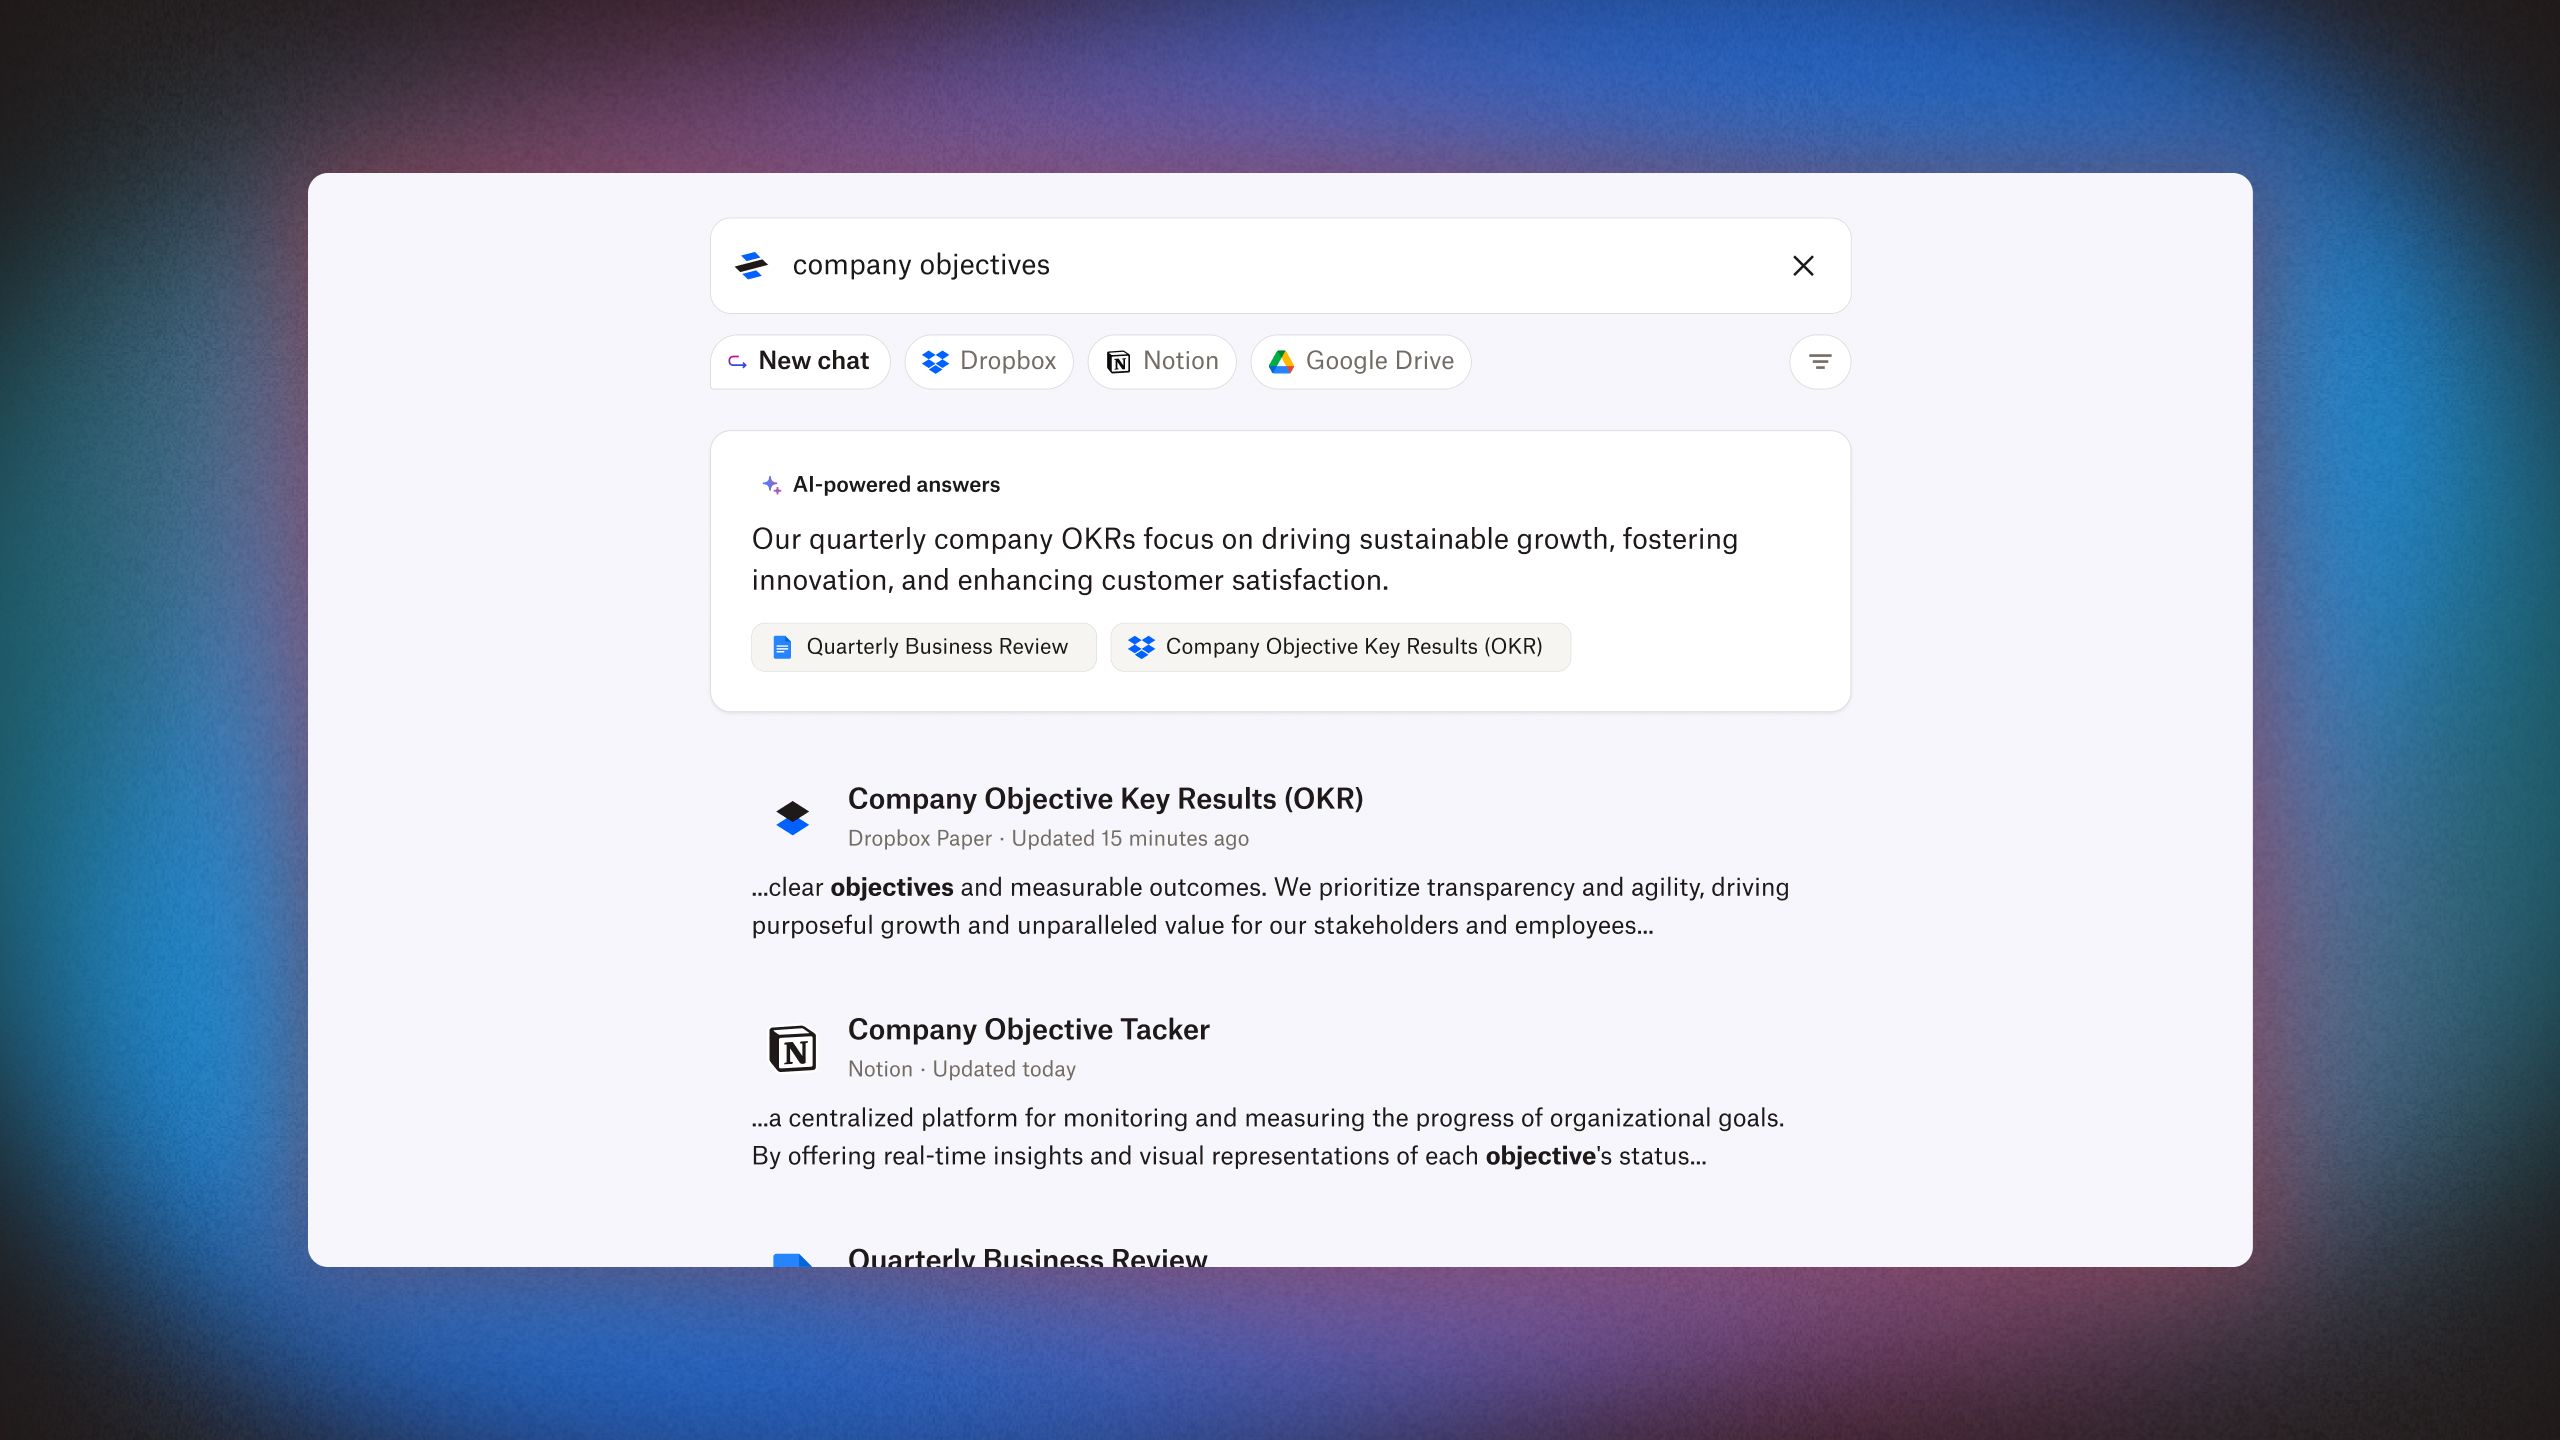 Image animation shows user typing “company objectives” into the Dash search bar, viewing content with the featured keywords, and then clicking on a Dropbox Paper file titled Company Objective Key Results (OKR).